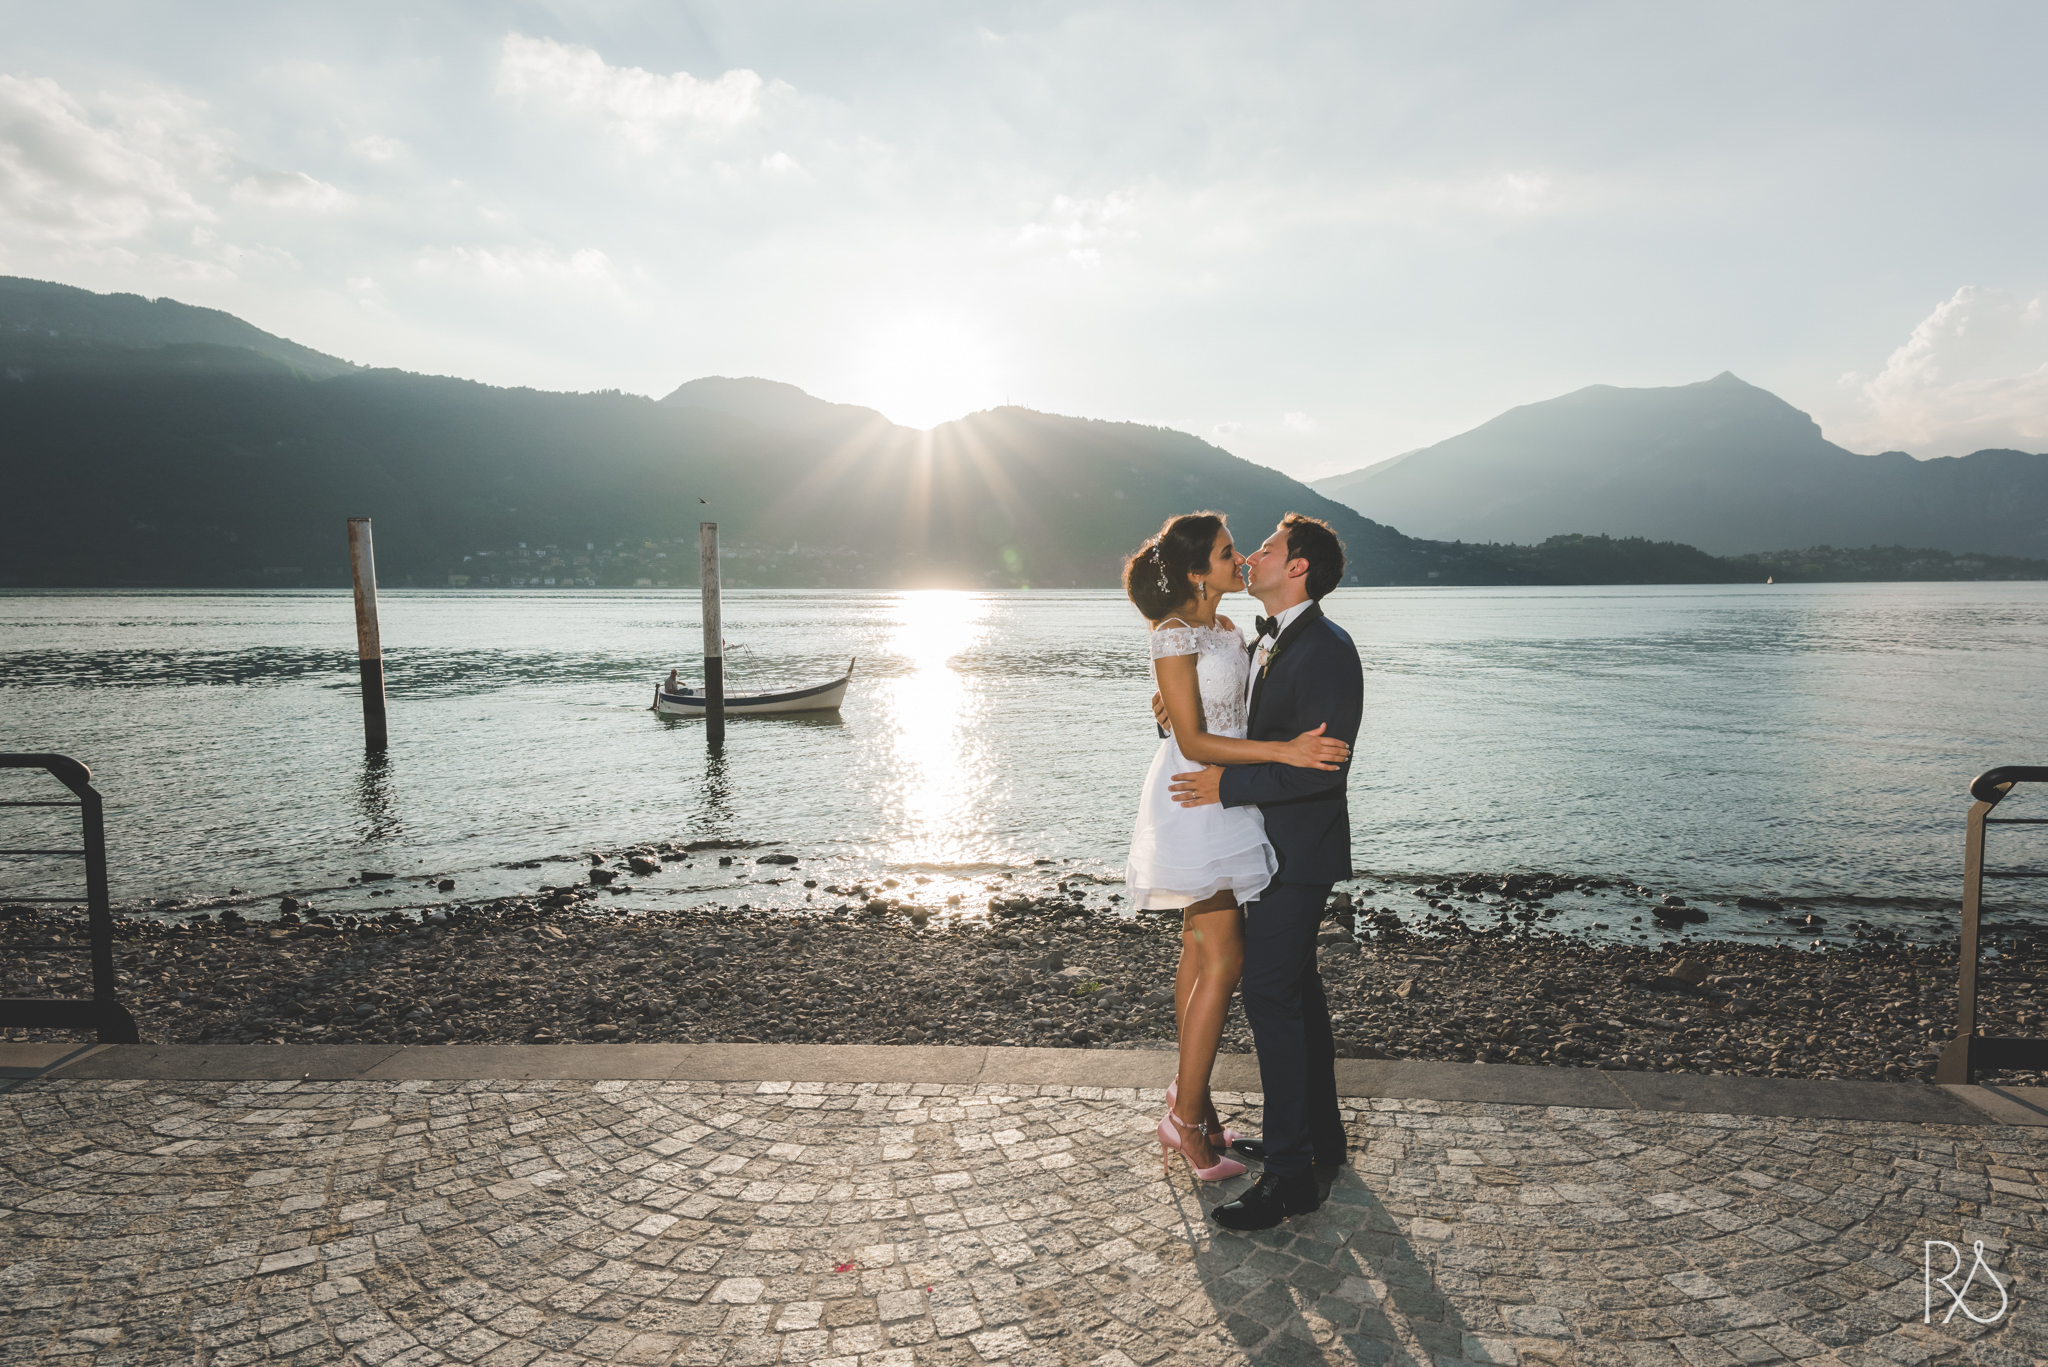 Wedding Photographer in Tuscany Italy and Europe